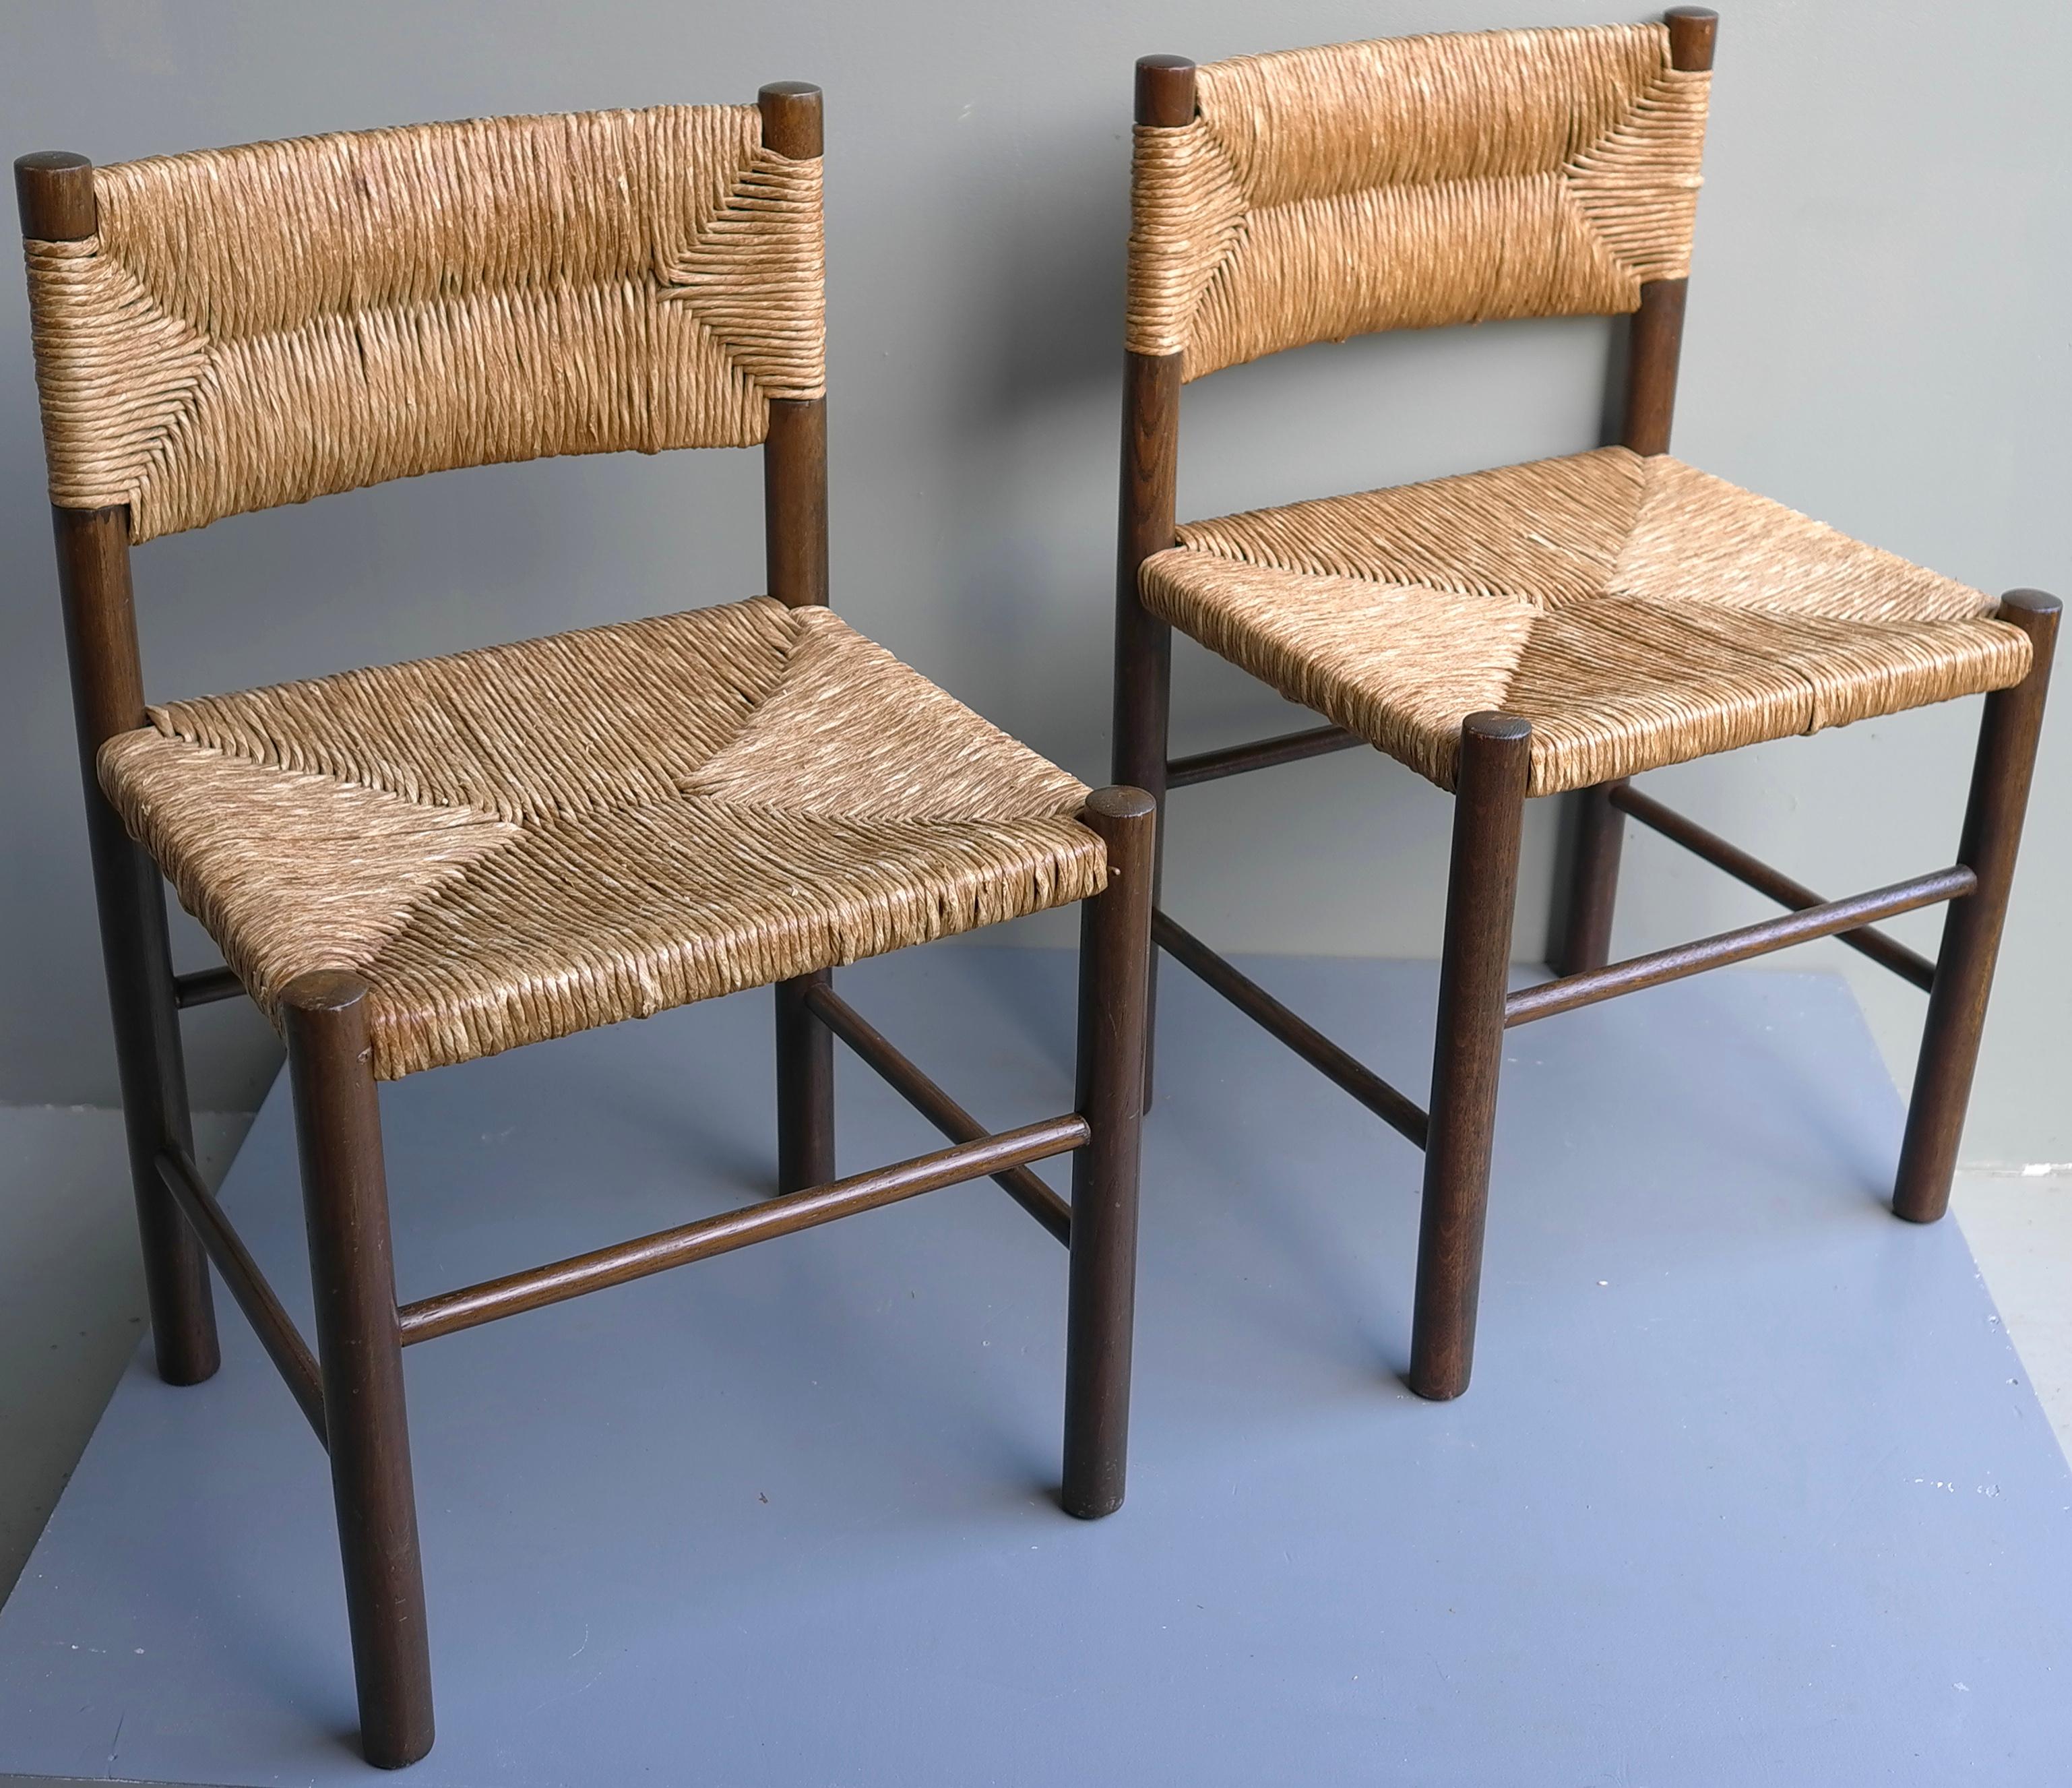 Pair of Charlotte Perriand 'Dordogne' chairs in wood and rush. By Robert Sentou, France, 1960's.